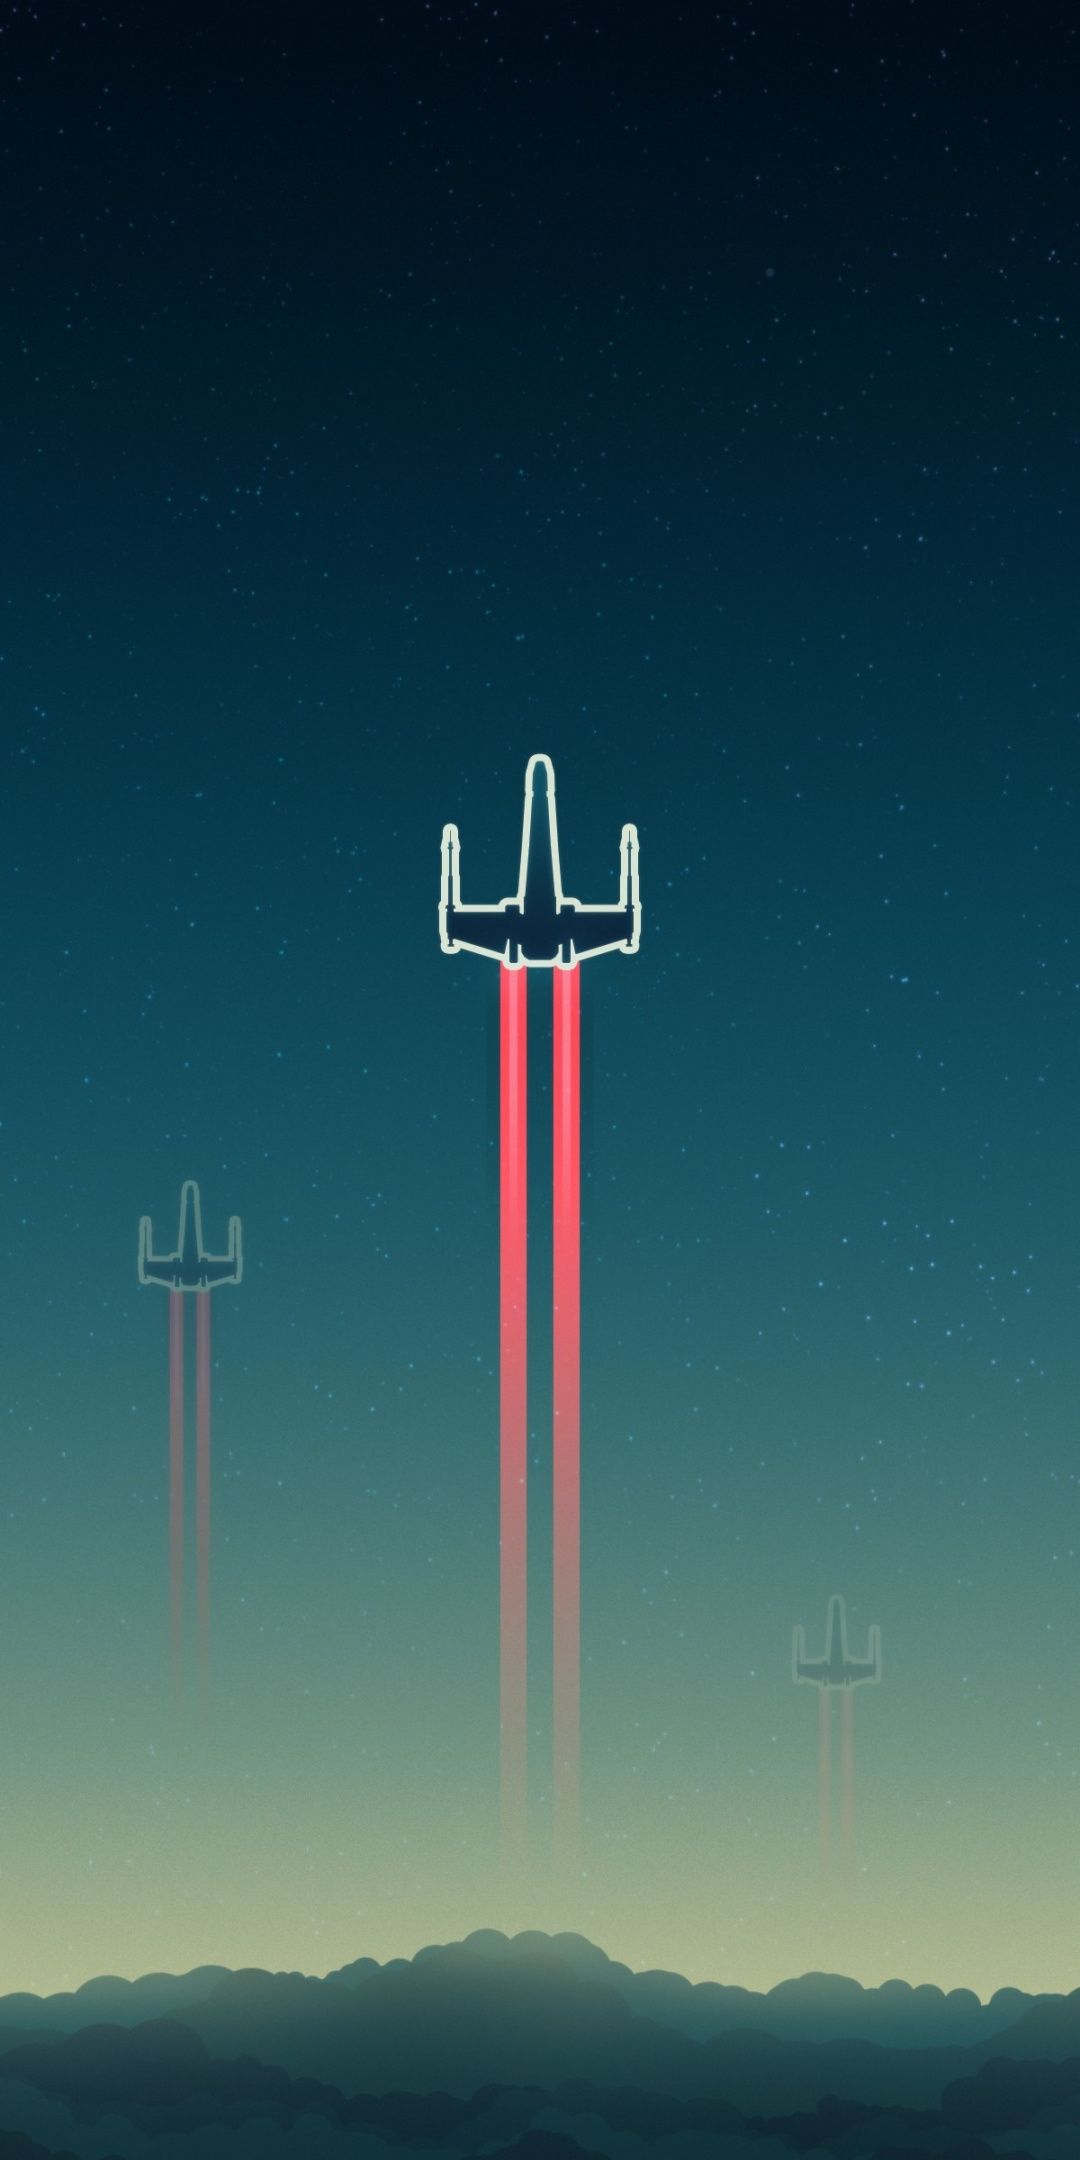 Download X Wing, Spacecraft, Aircraft, Star Wars: Starfighter, Video Game, Minimal 1080x2160 Wallpaper, Honor 7x, Honor 9 Lite, Honor View 1080x2160 HD Image, Background, 1760